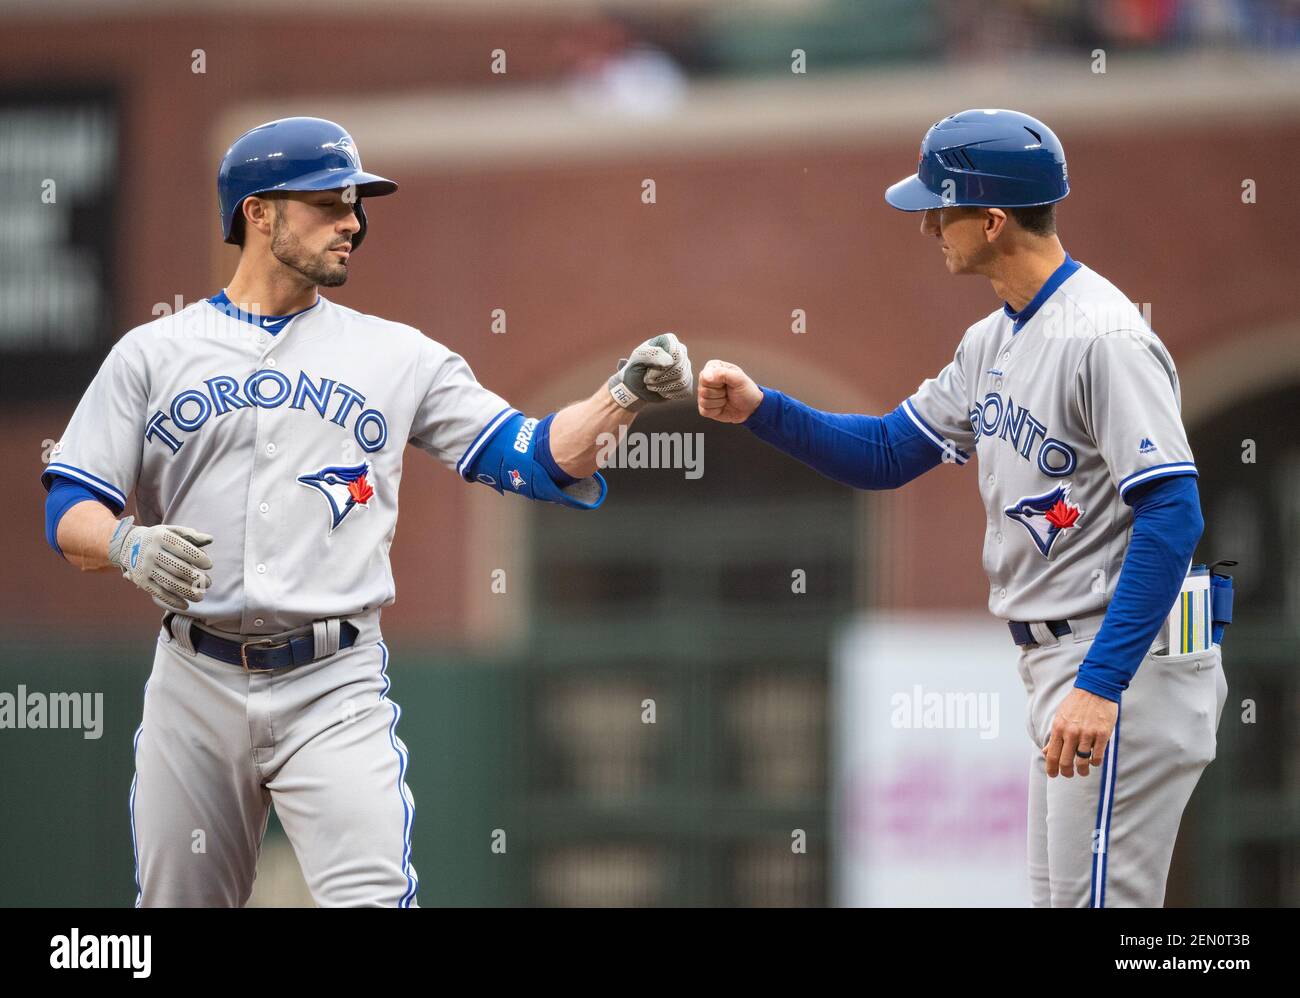 May 14, 2019: Toronto Blue Jays right fielder Randal Grichuk (15) gets a  fist bump for his first inning sinle from first base coach Mark Budzinski  (53), during a MLB game between